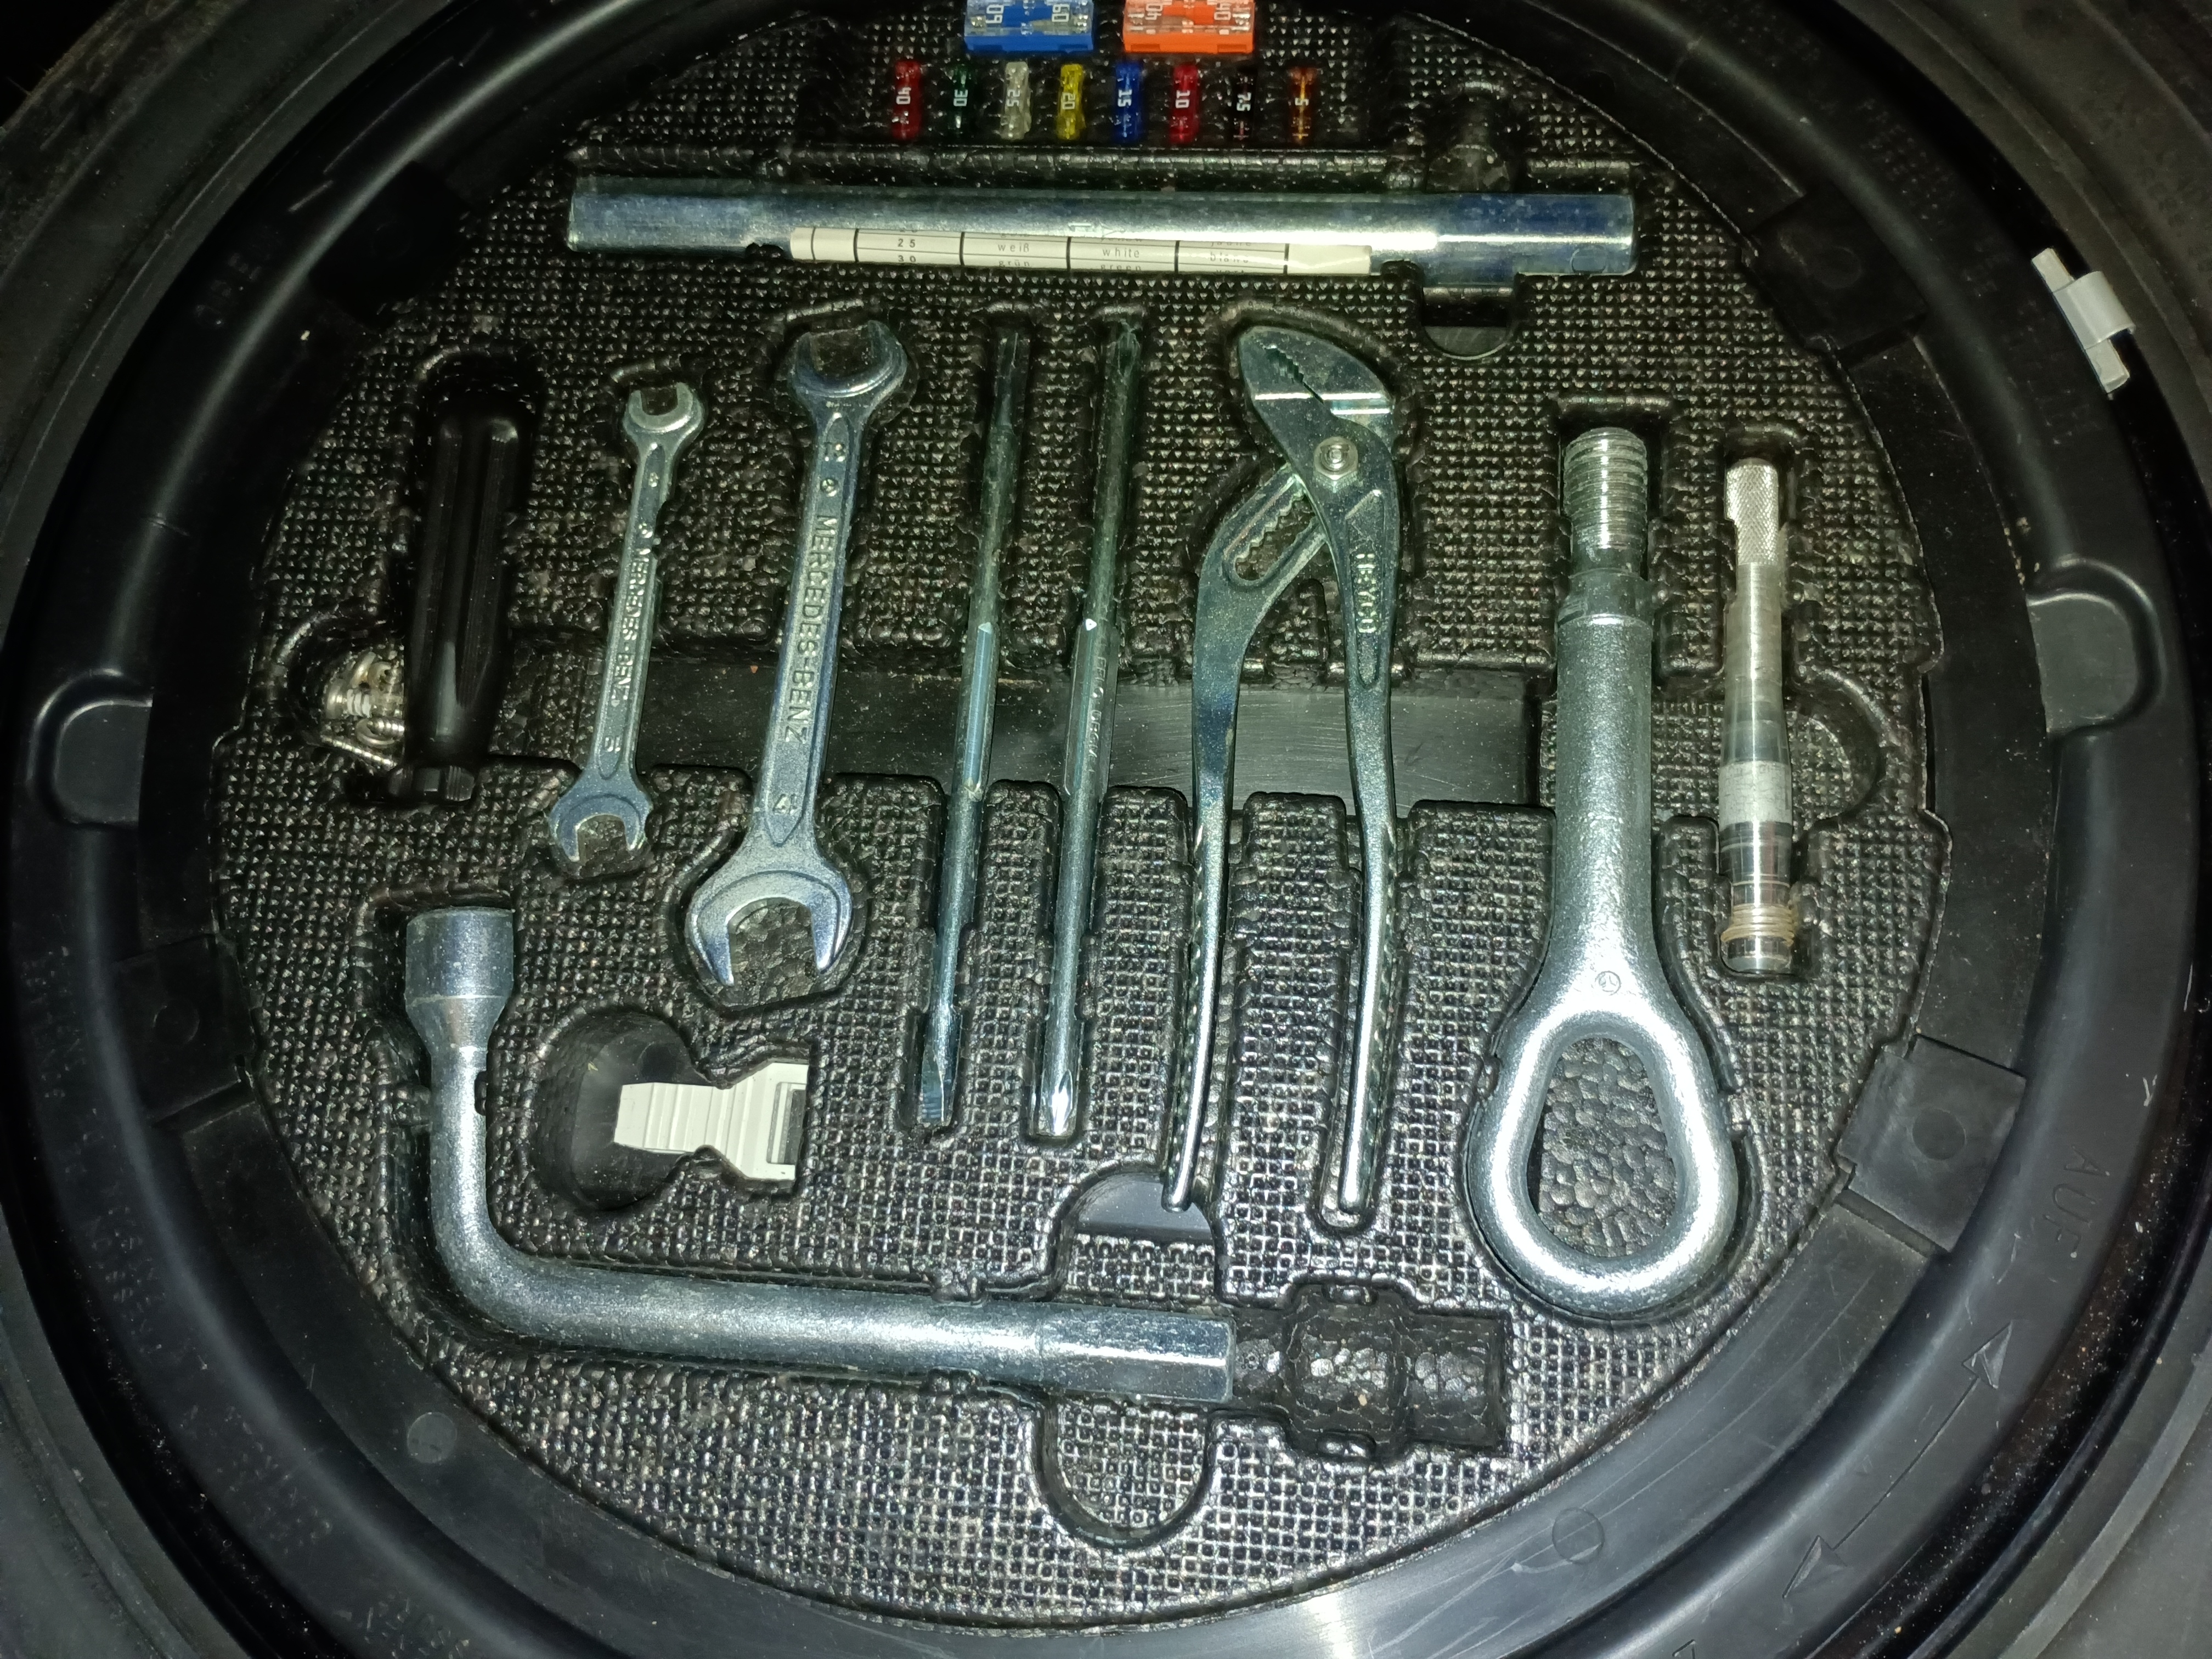 Full Mercedes branded tool kit with white tire changing gloves.